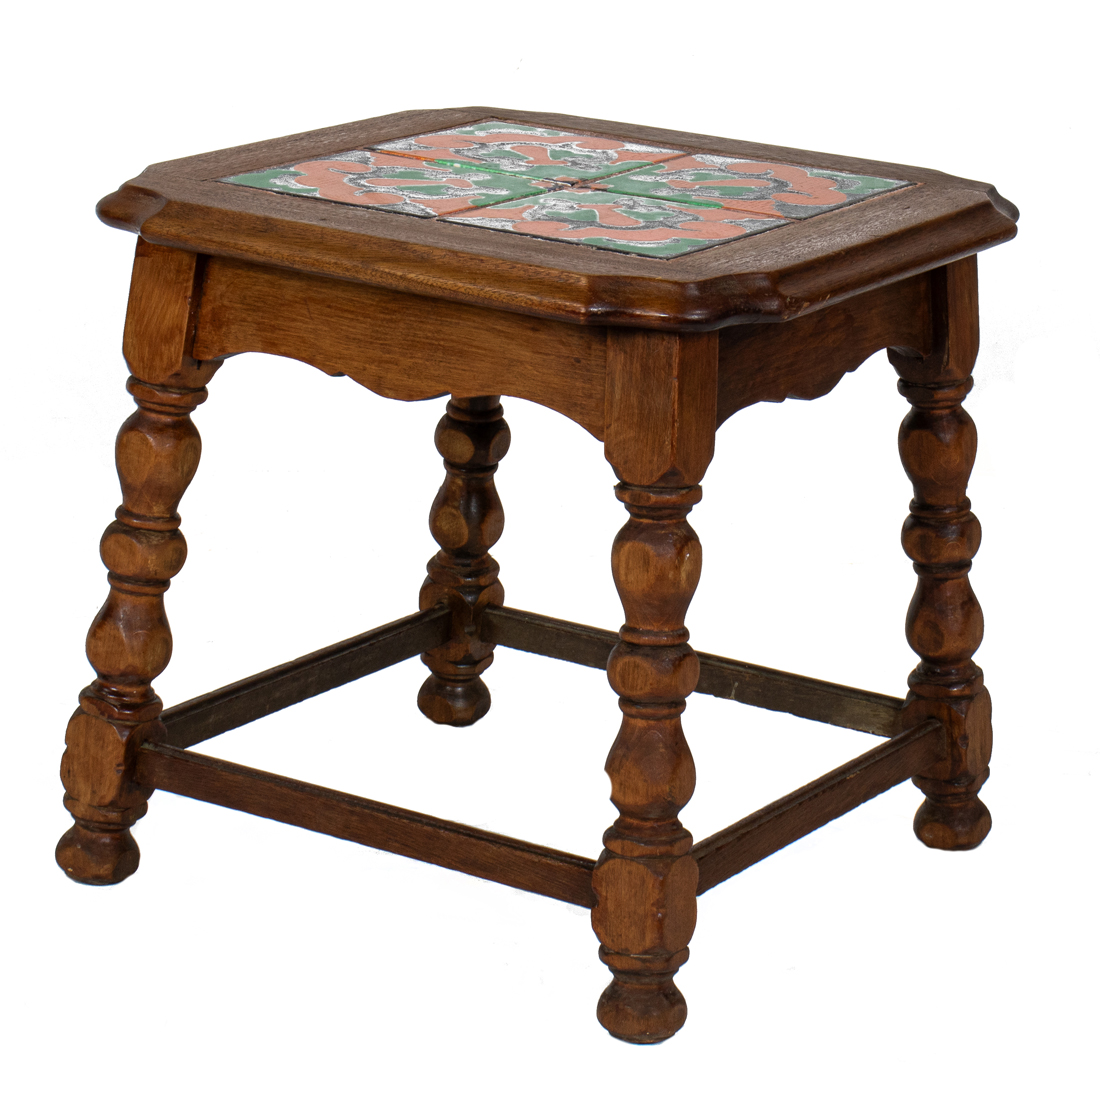 A MONTEREY STYLE TILE TOP TABLE